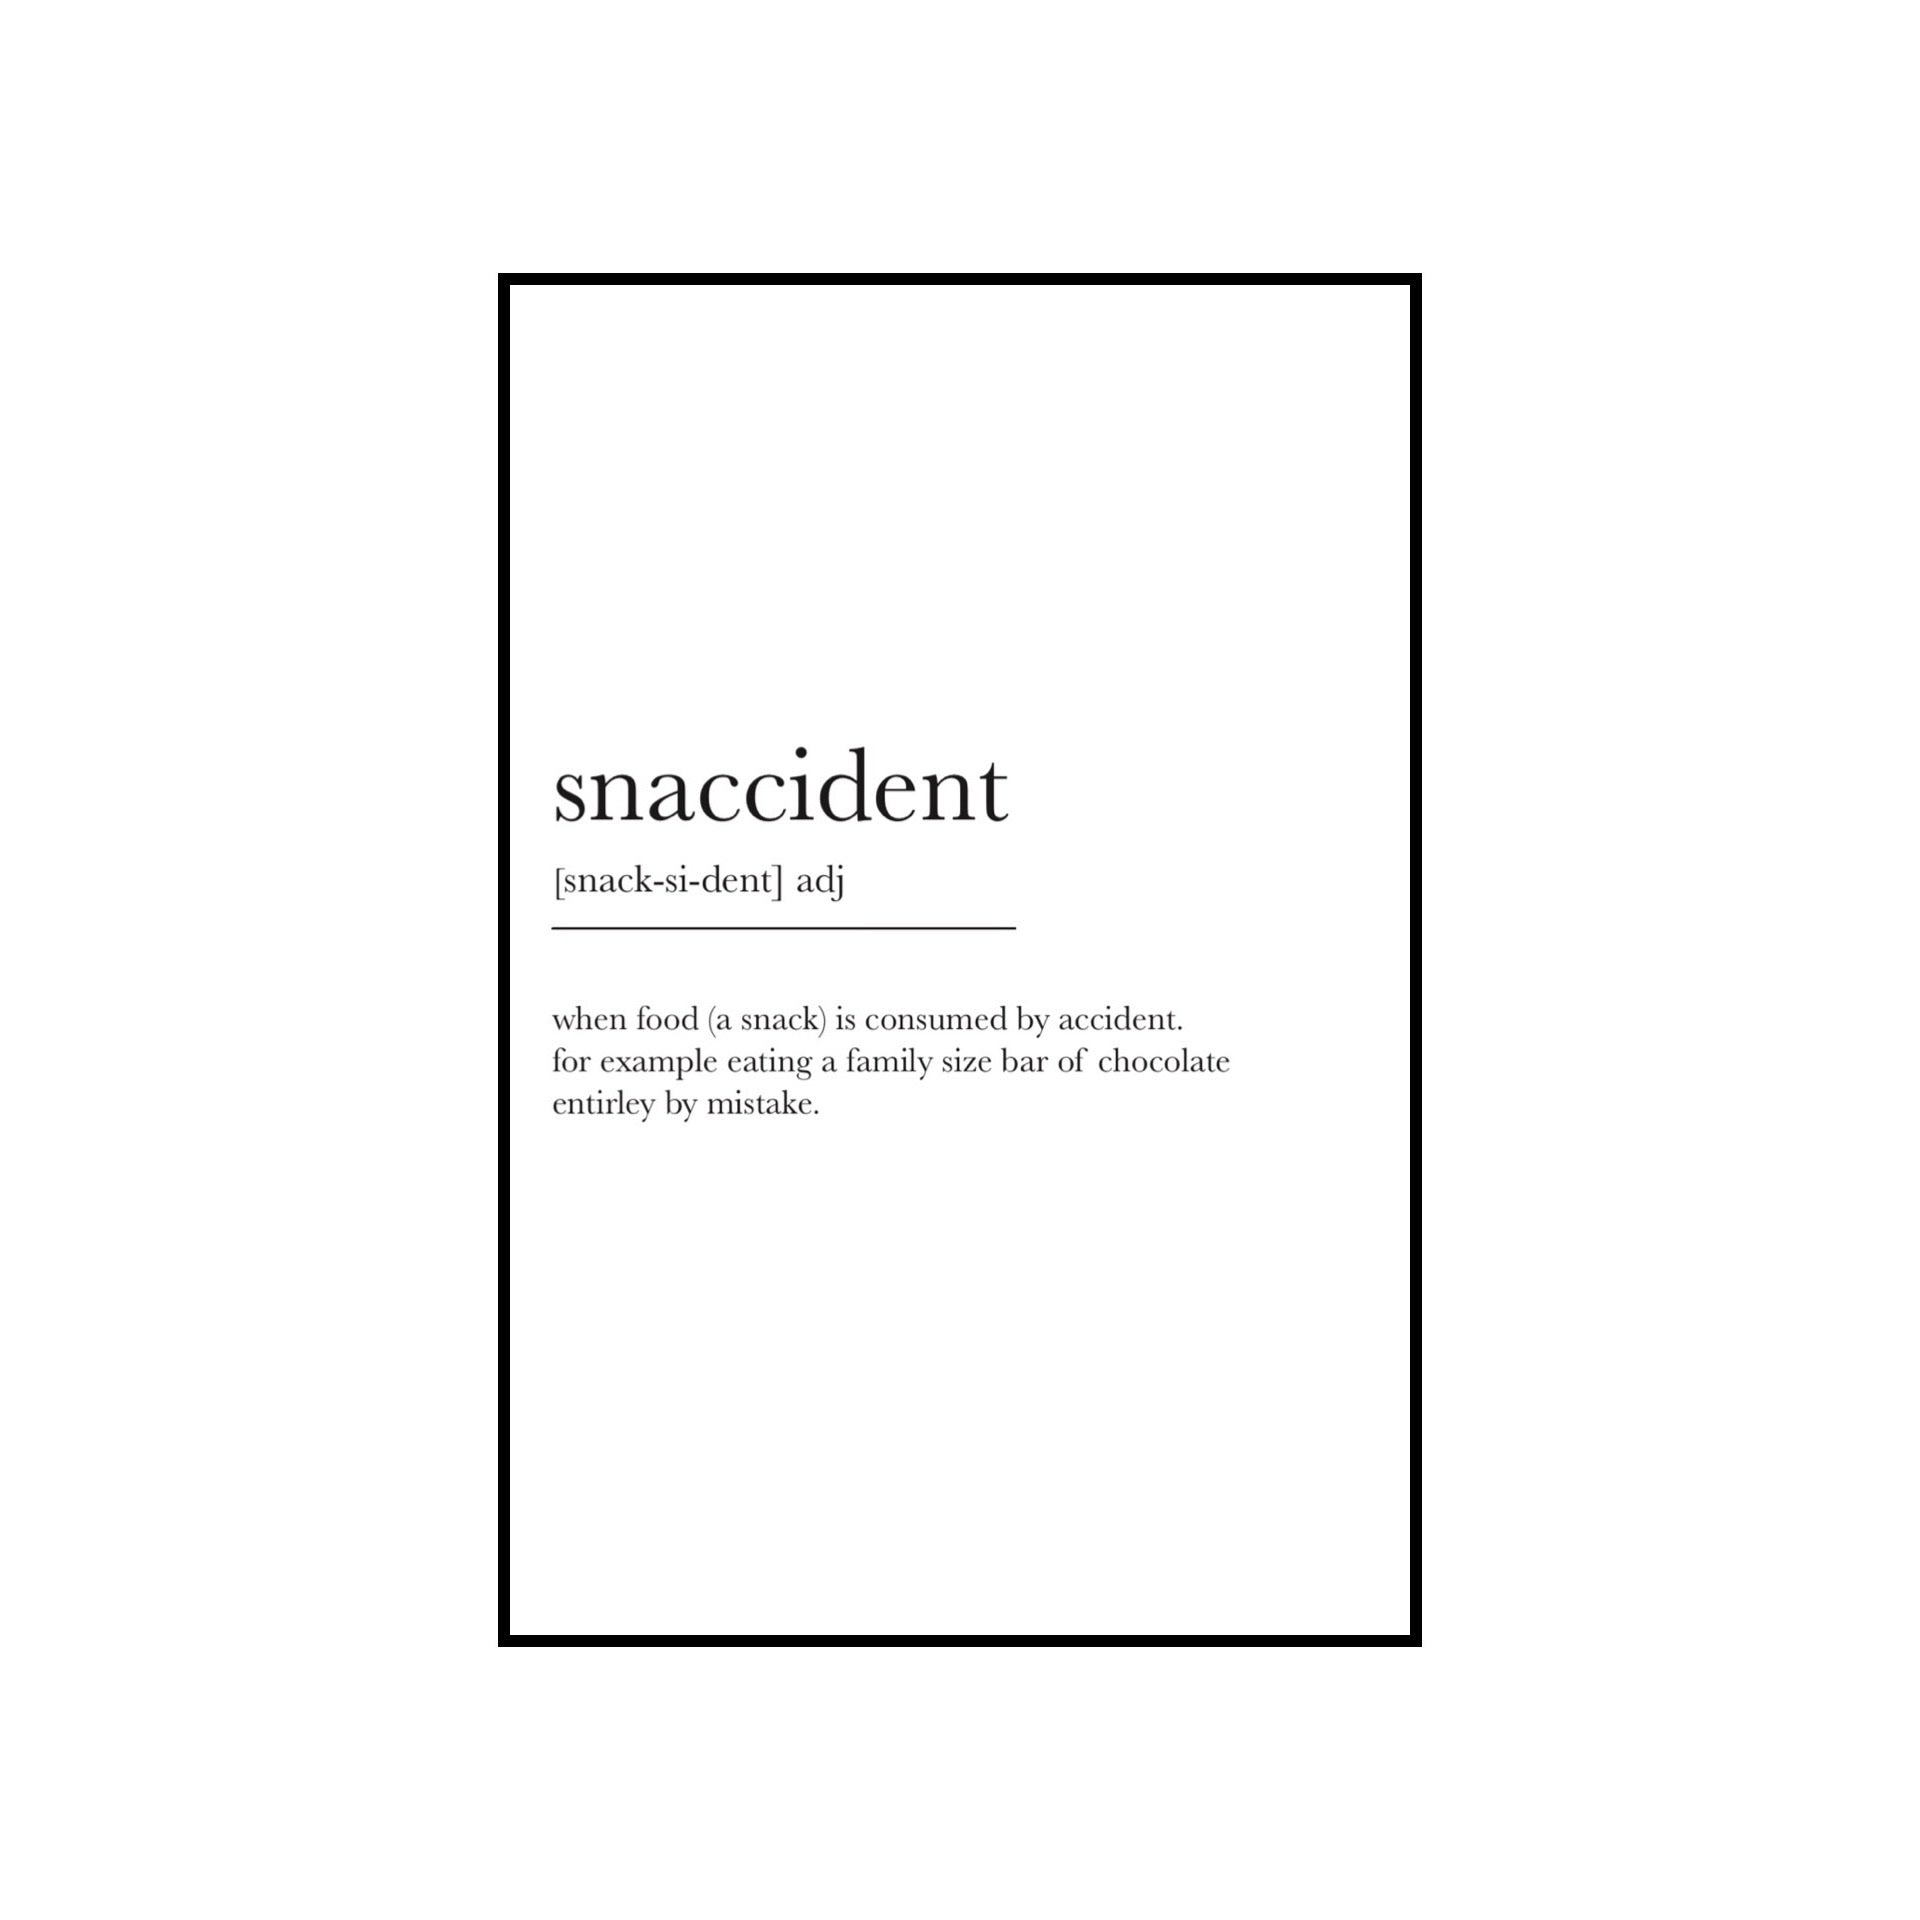 Snaccident - THE WALL STYLIST